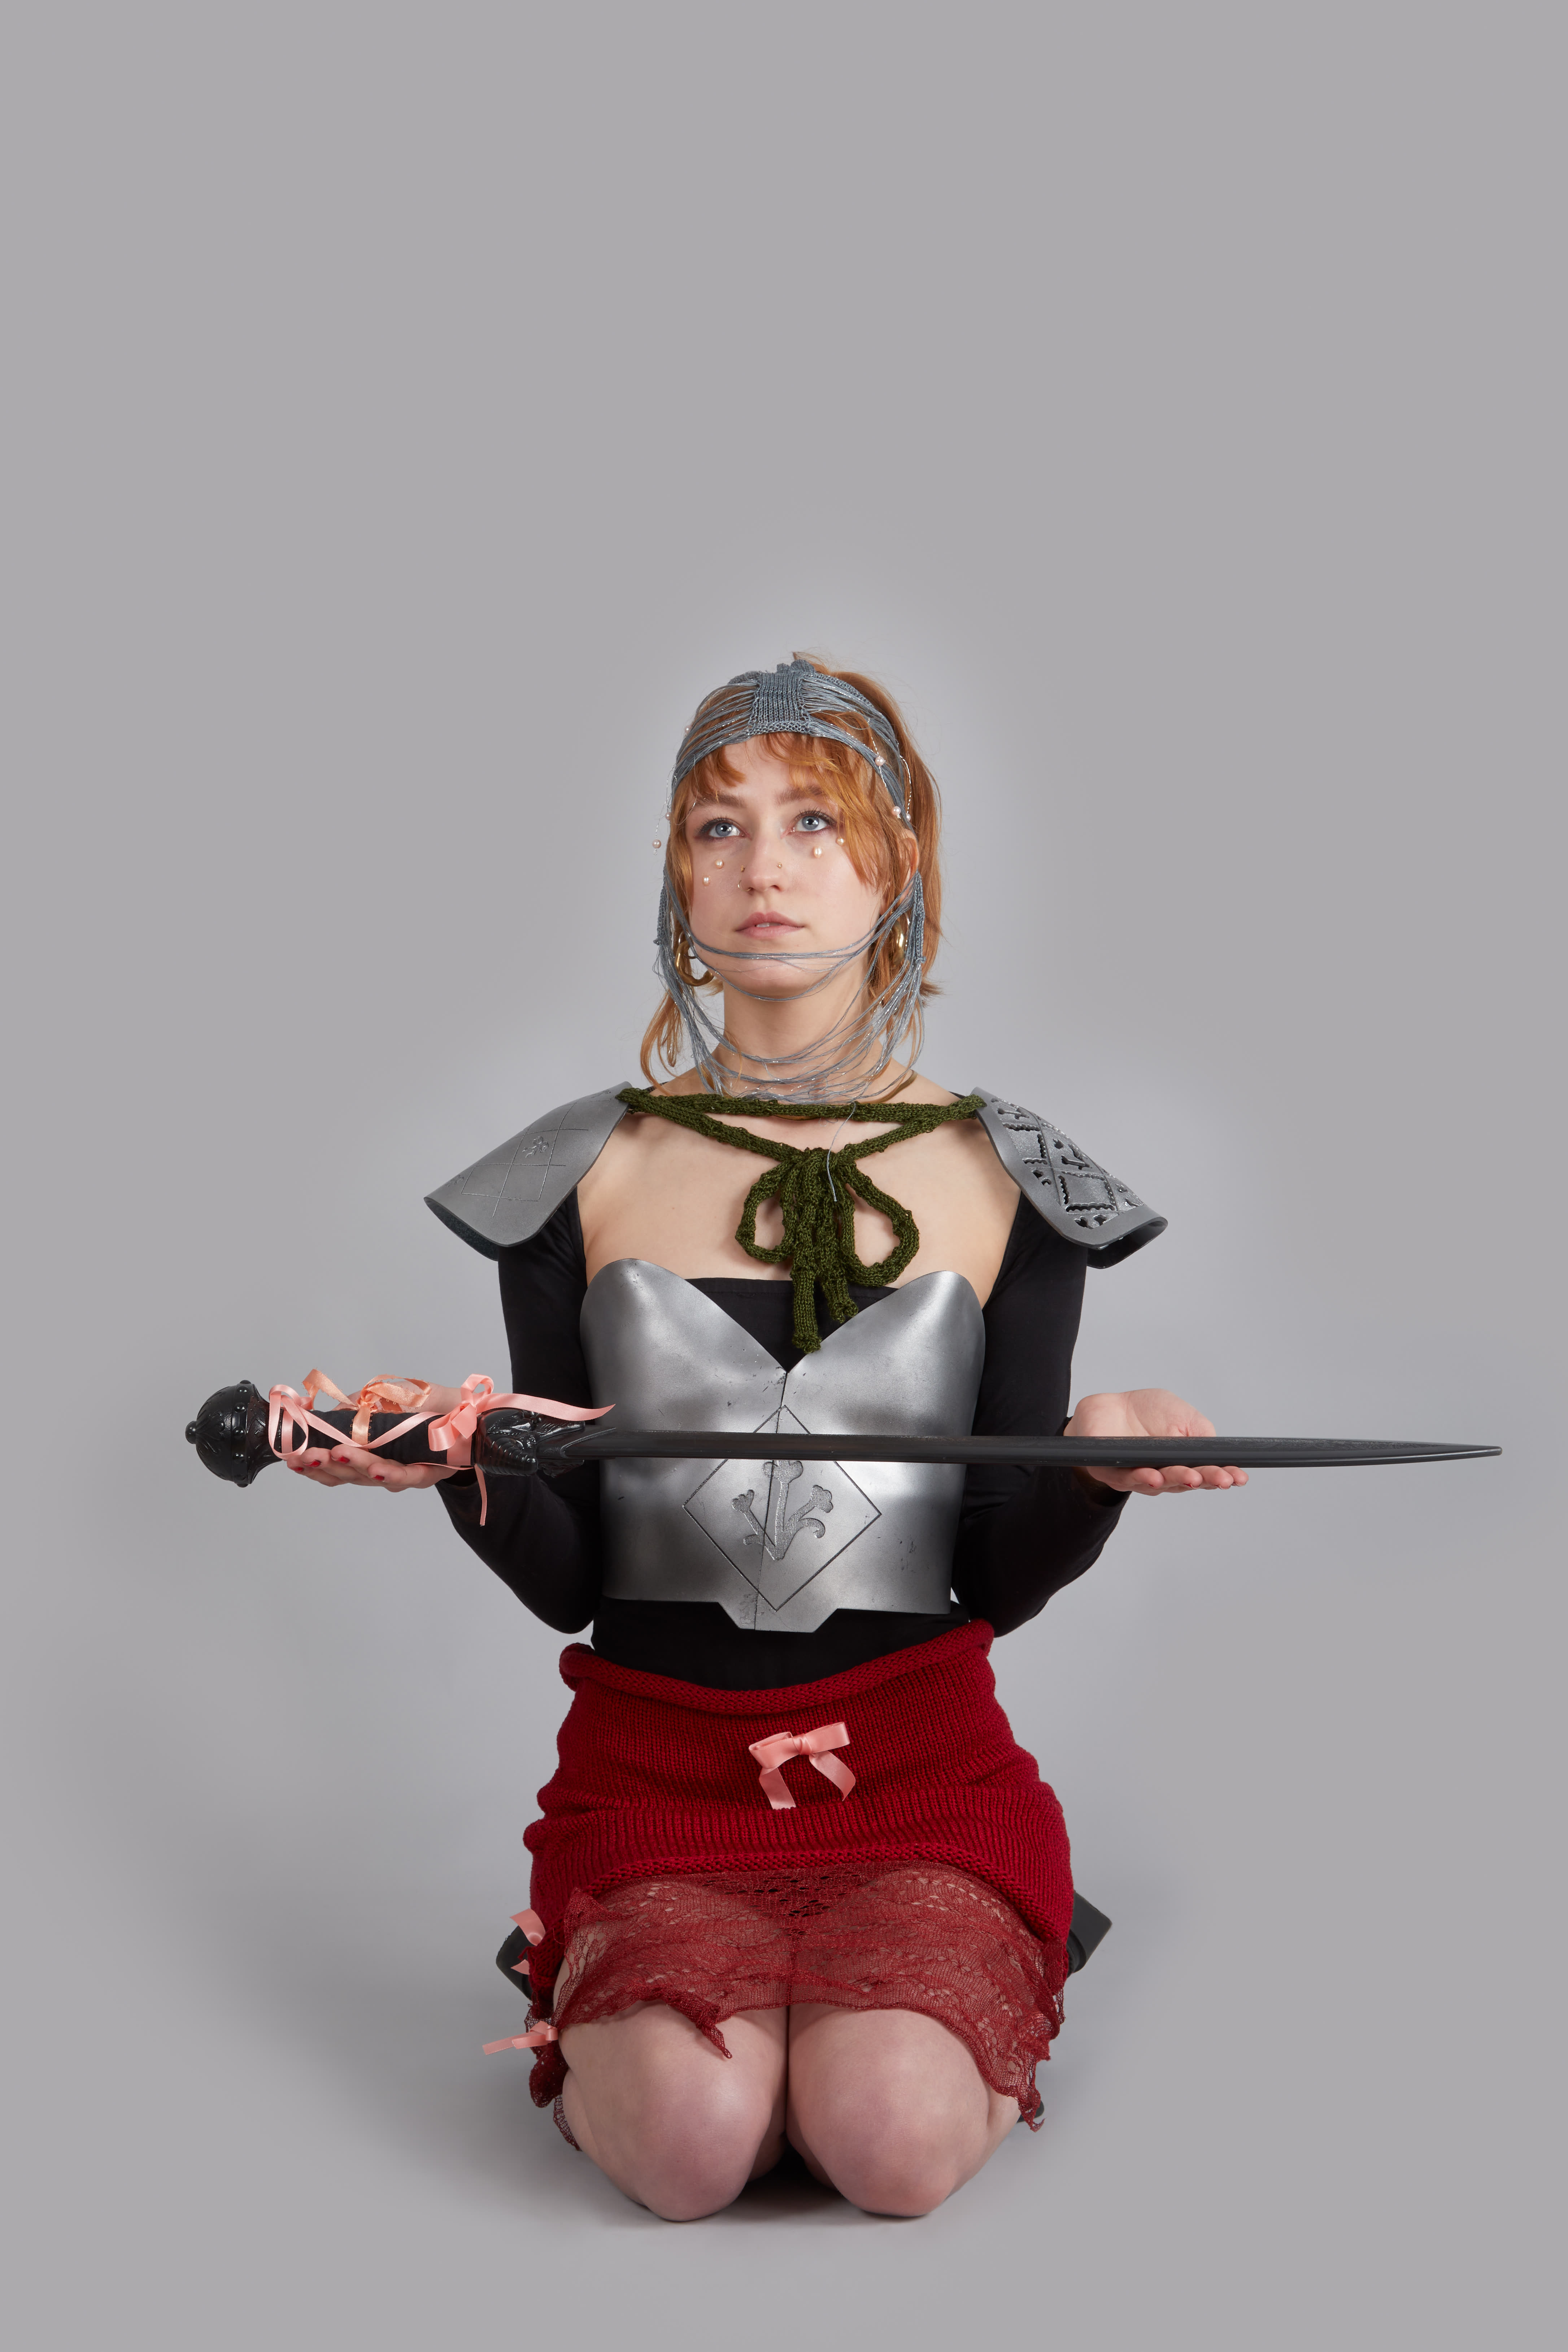 Model sat on knees holding a sword wearing armour like chest piece and shoulder pads with red knitted skirt.